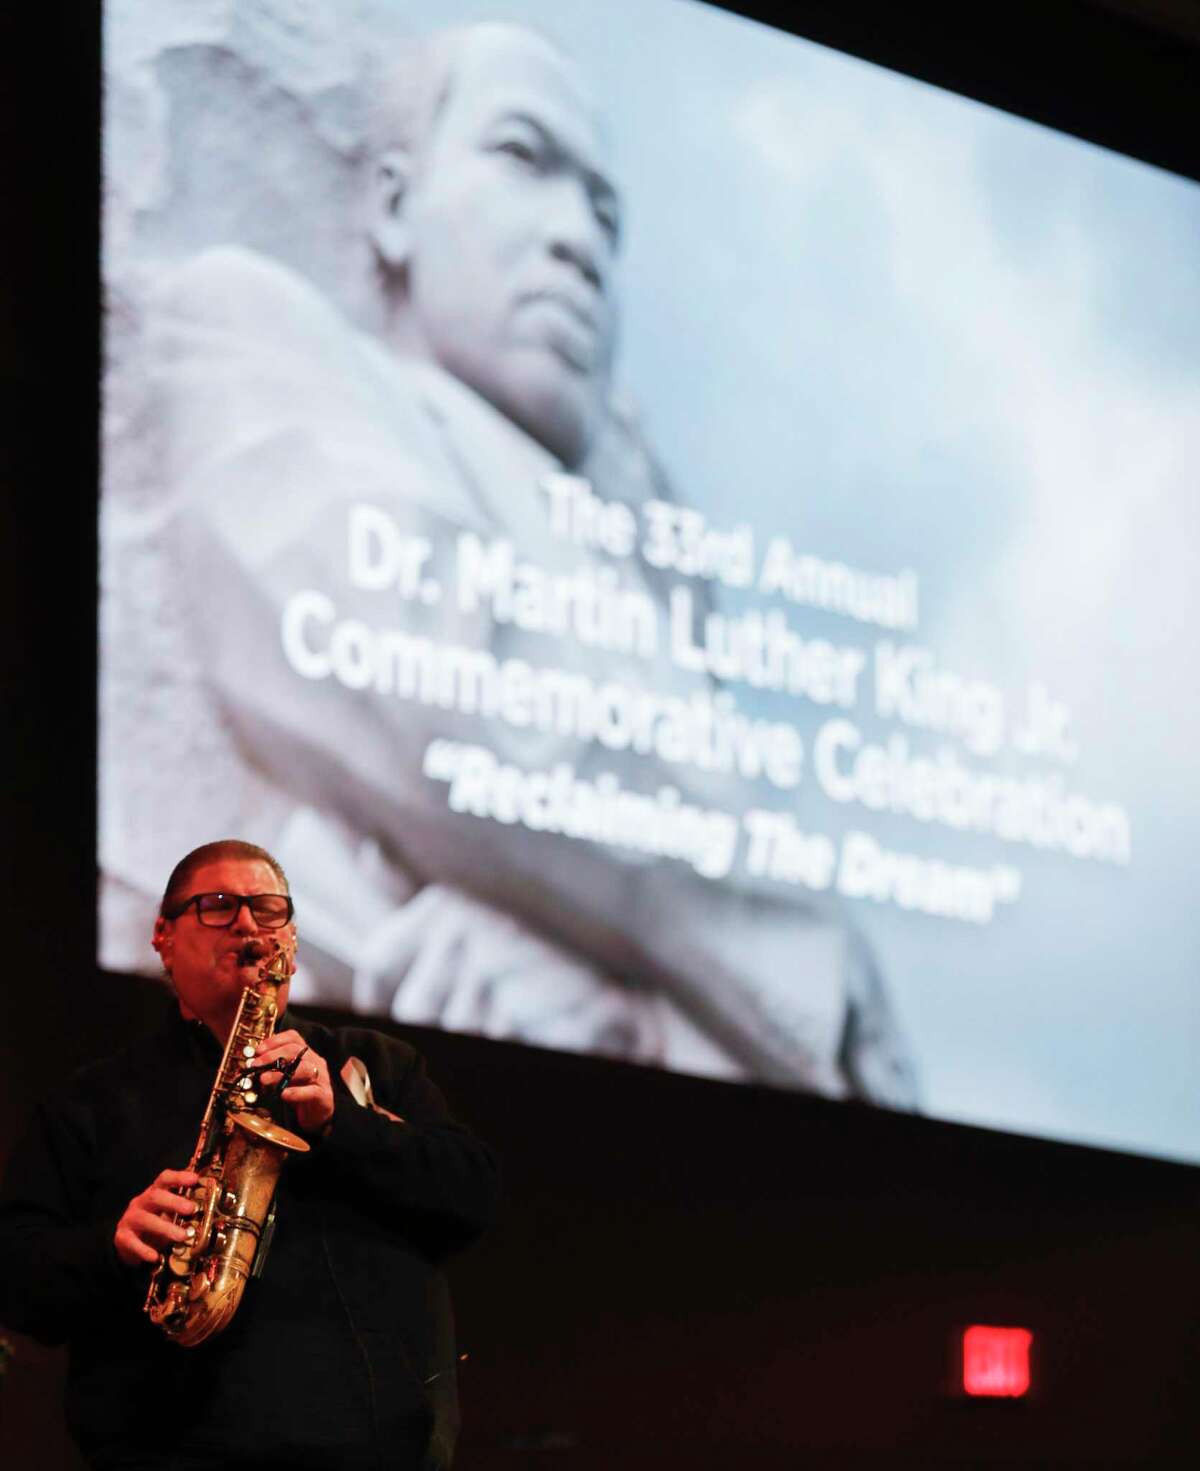 Saxophonist Mark Holter performs during the “Reclaiming the Dream” program in celebration of the life of Dr. Martin Luther King, Jr. at The Woodlands Methodist Church Monday, Jan. 17, 2022, in The Woodlands.